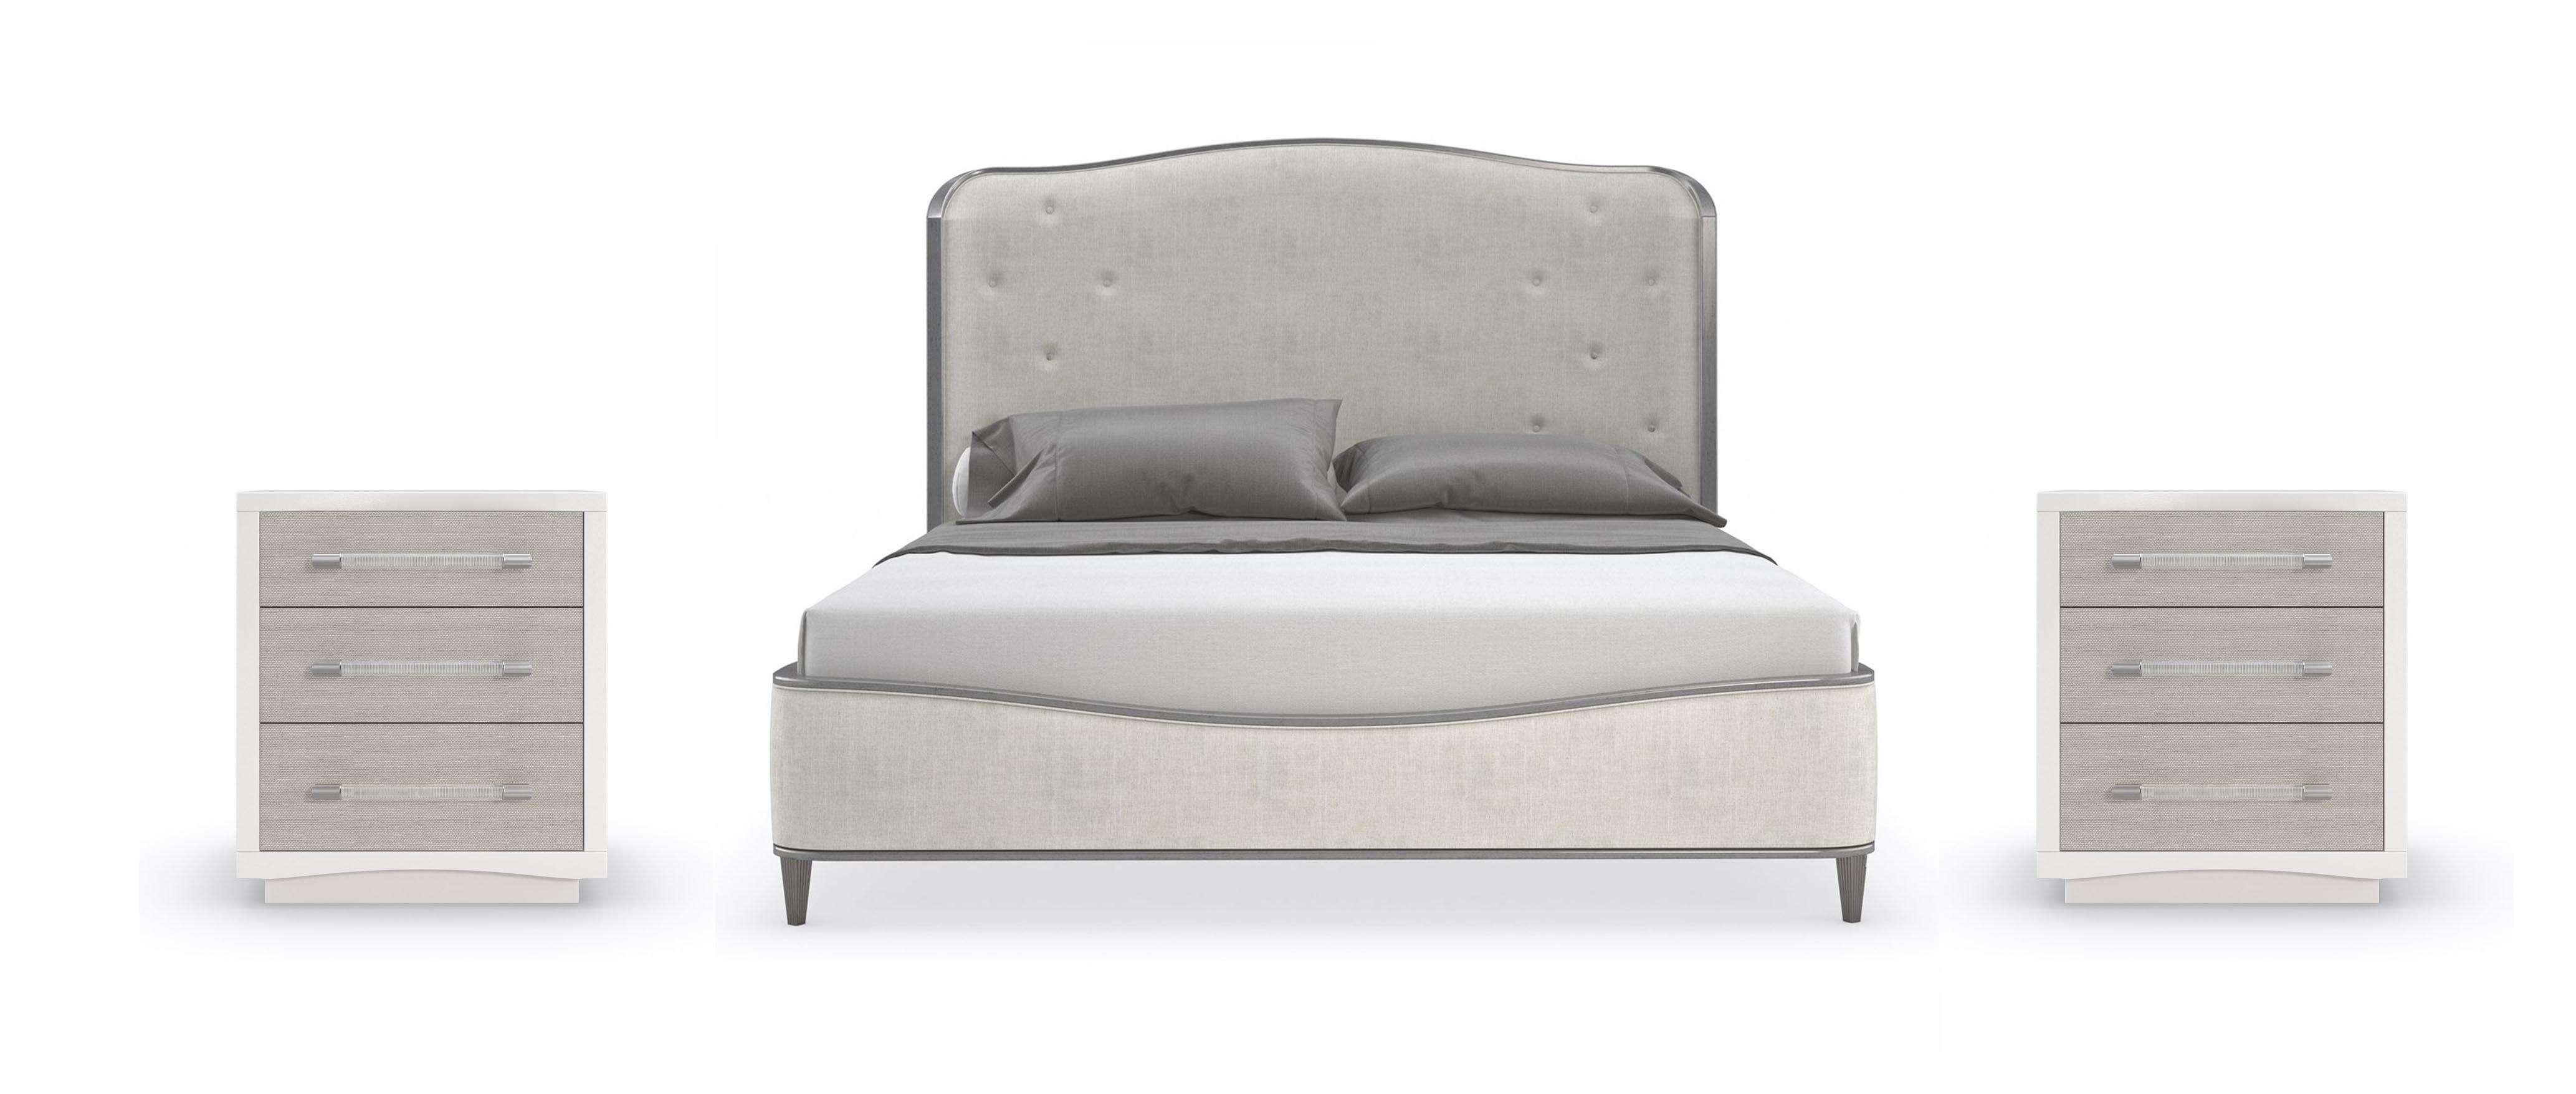 Contemporary Panel Bedroom Set CLEAR THE AIR / CLARITY CLA-421-103-Set-3 in Light Gray Fabric